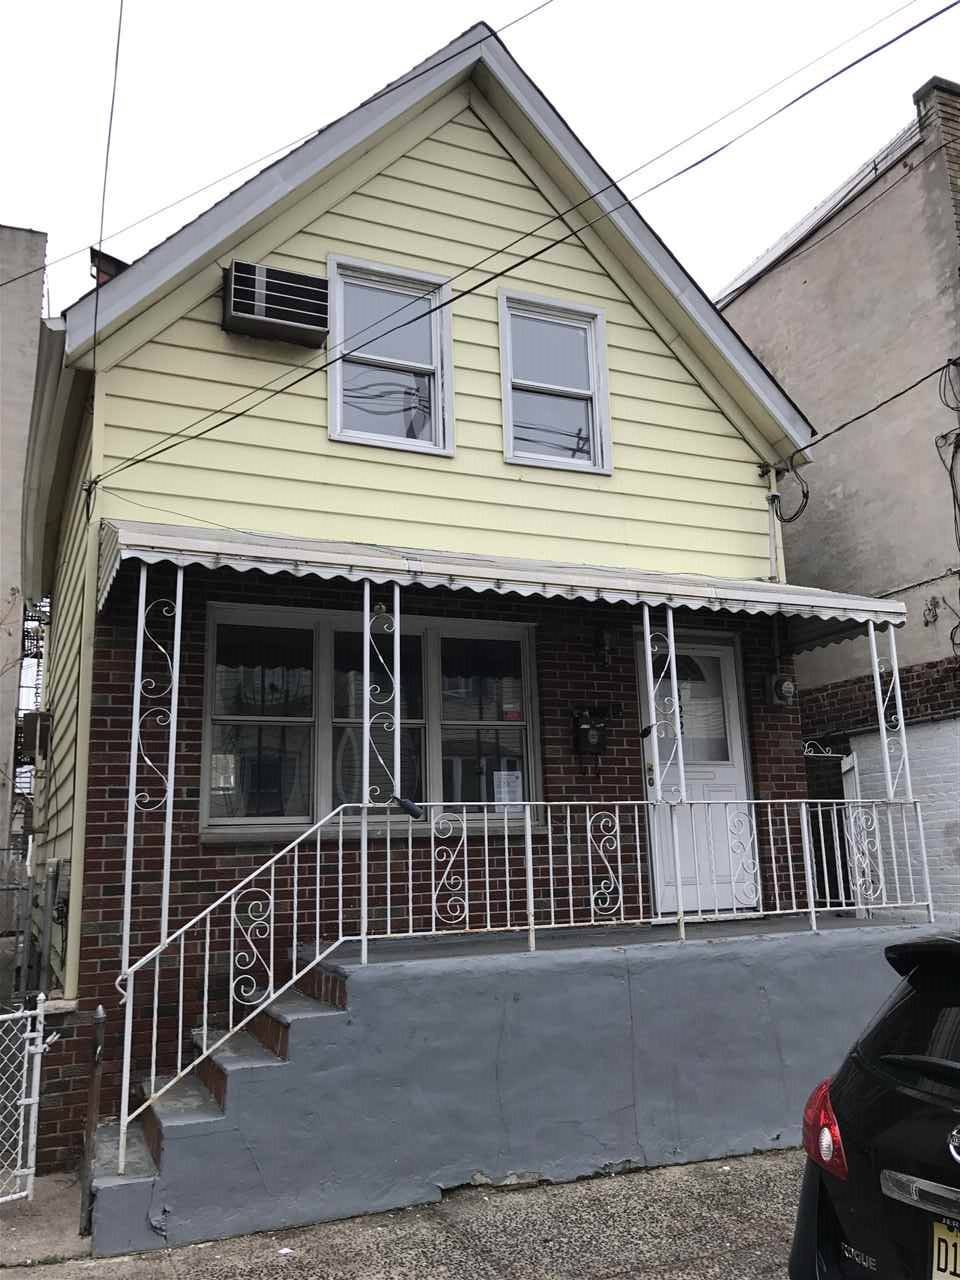 CHARMING SINGLE FAMILY IN PRIME AREA OF UNION CITY